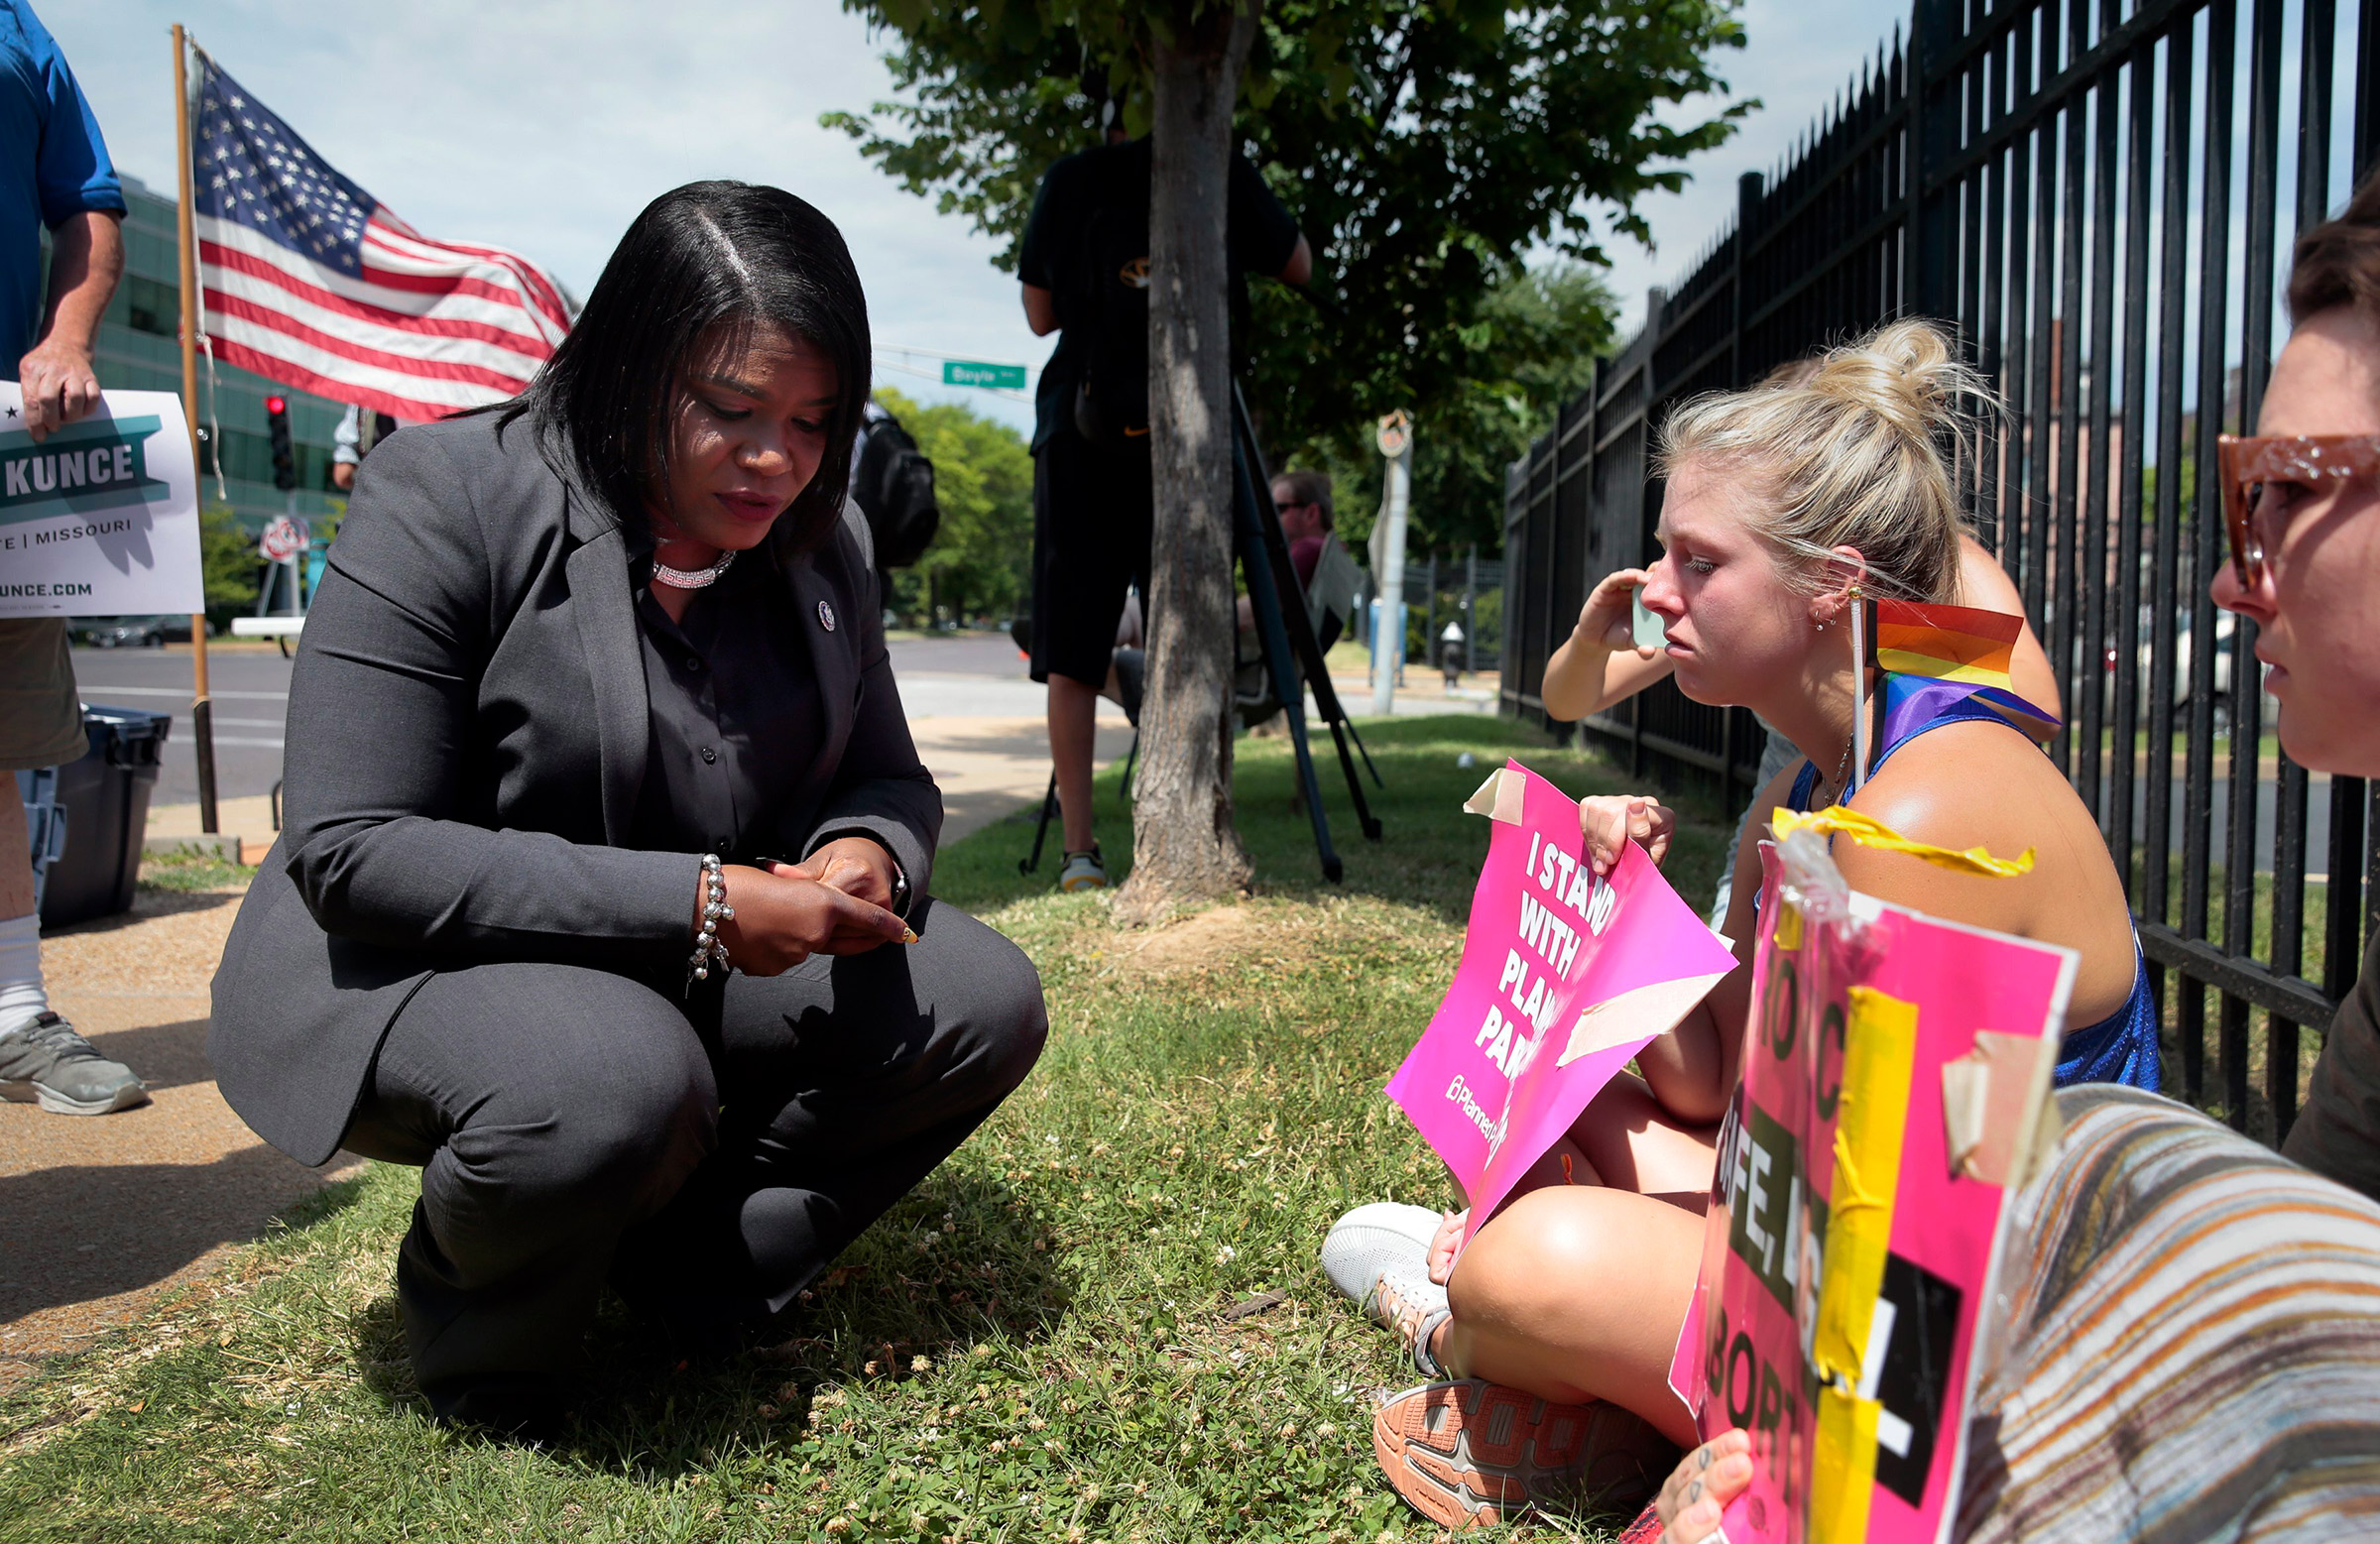 Abortion-rights advocates U.S. Rep. Cori Bush, D-St. Louis, from left, Kendyl Underwood, 20, and Brittany Nickens, 26, right, react outside Planned Parenthood of Missouri after the U.S. Supreme Court announced a decision overturning abortion protections in Roe vs Wade on June 24, 2022, in St. Louis. (Robert Cohen—St. Louis Post-Dispatch/AP)